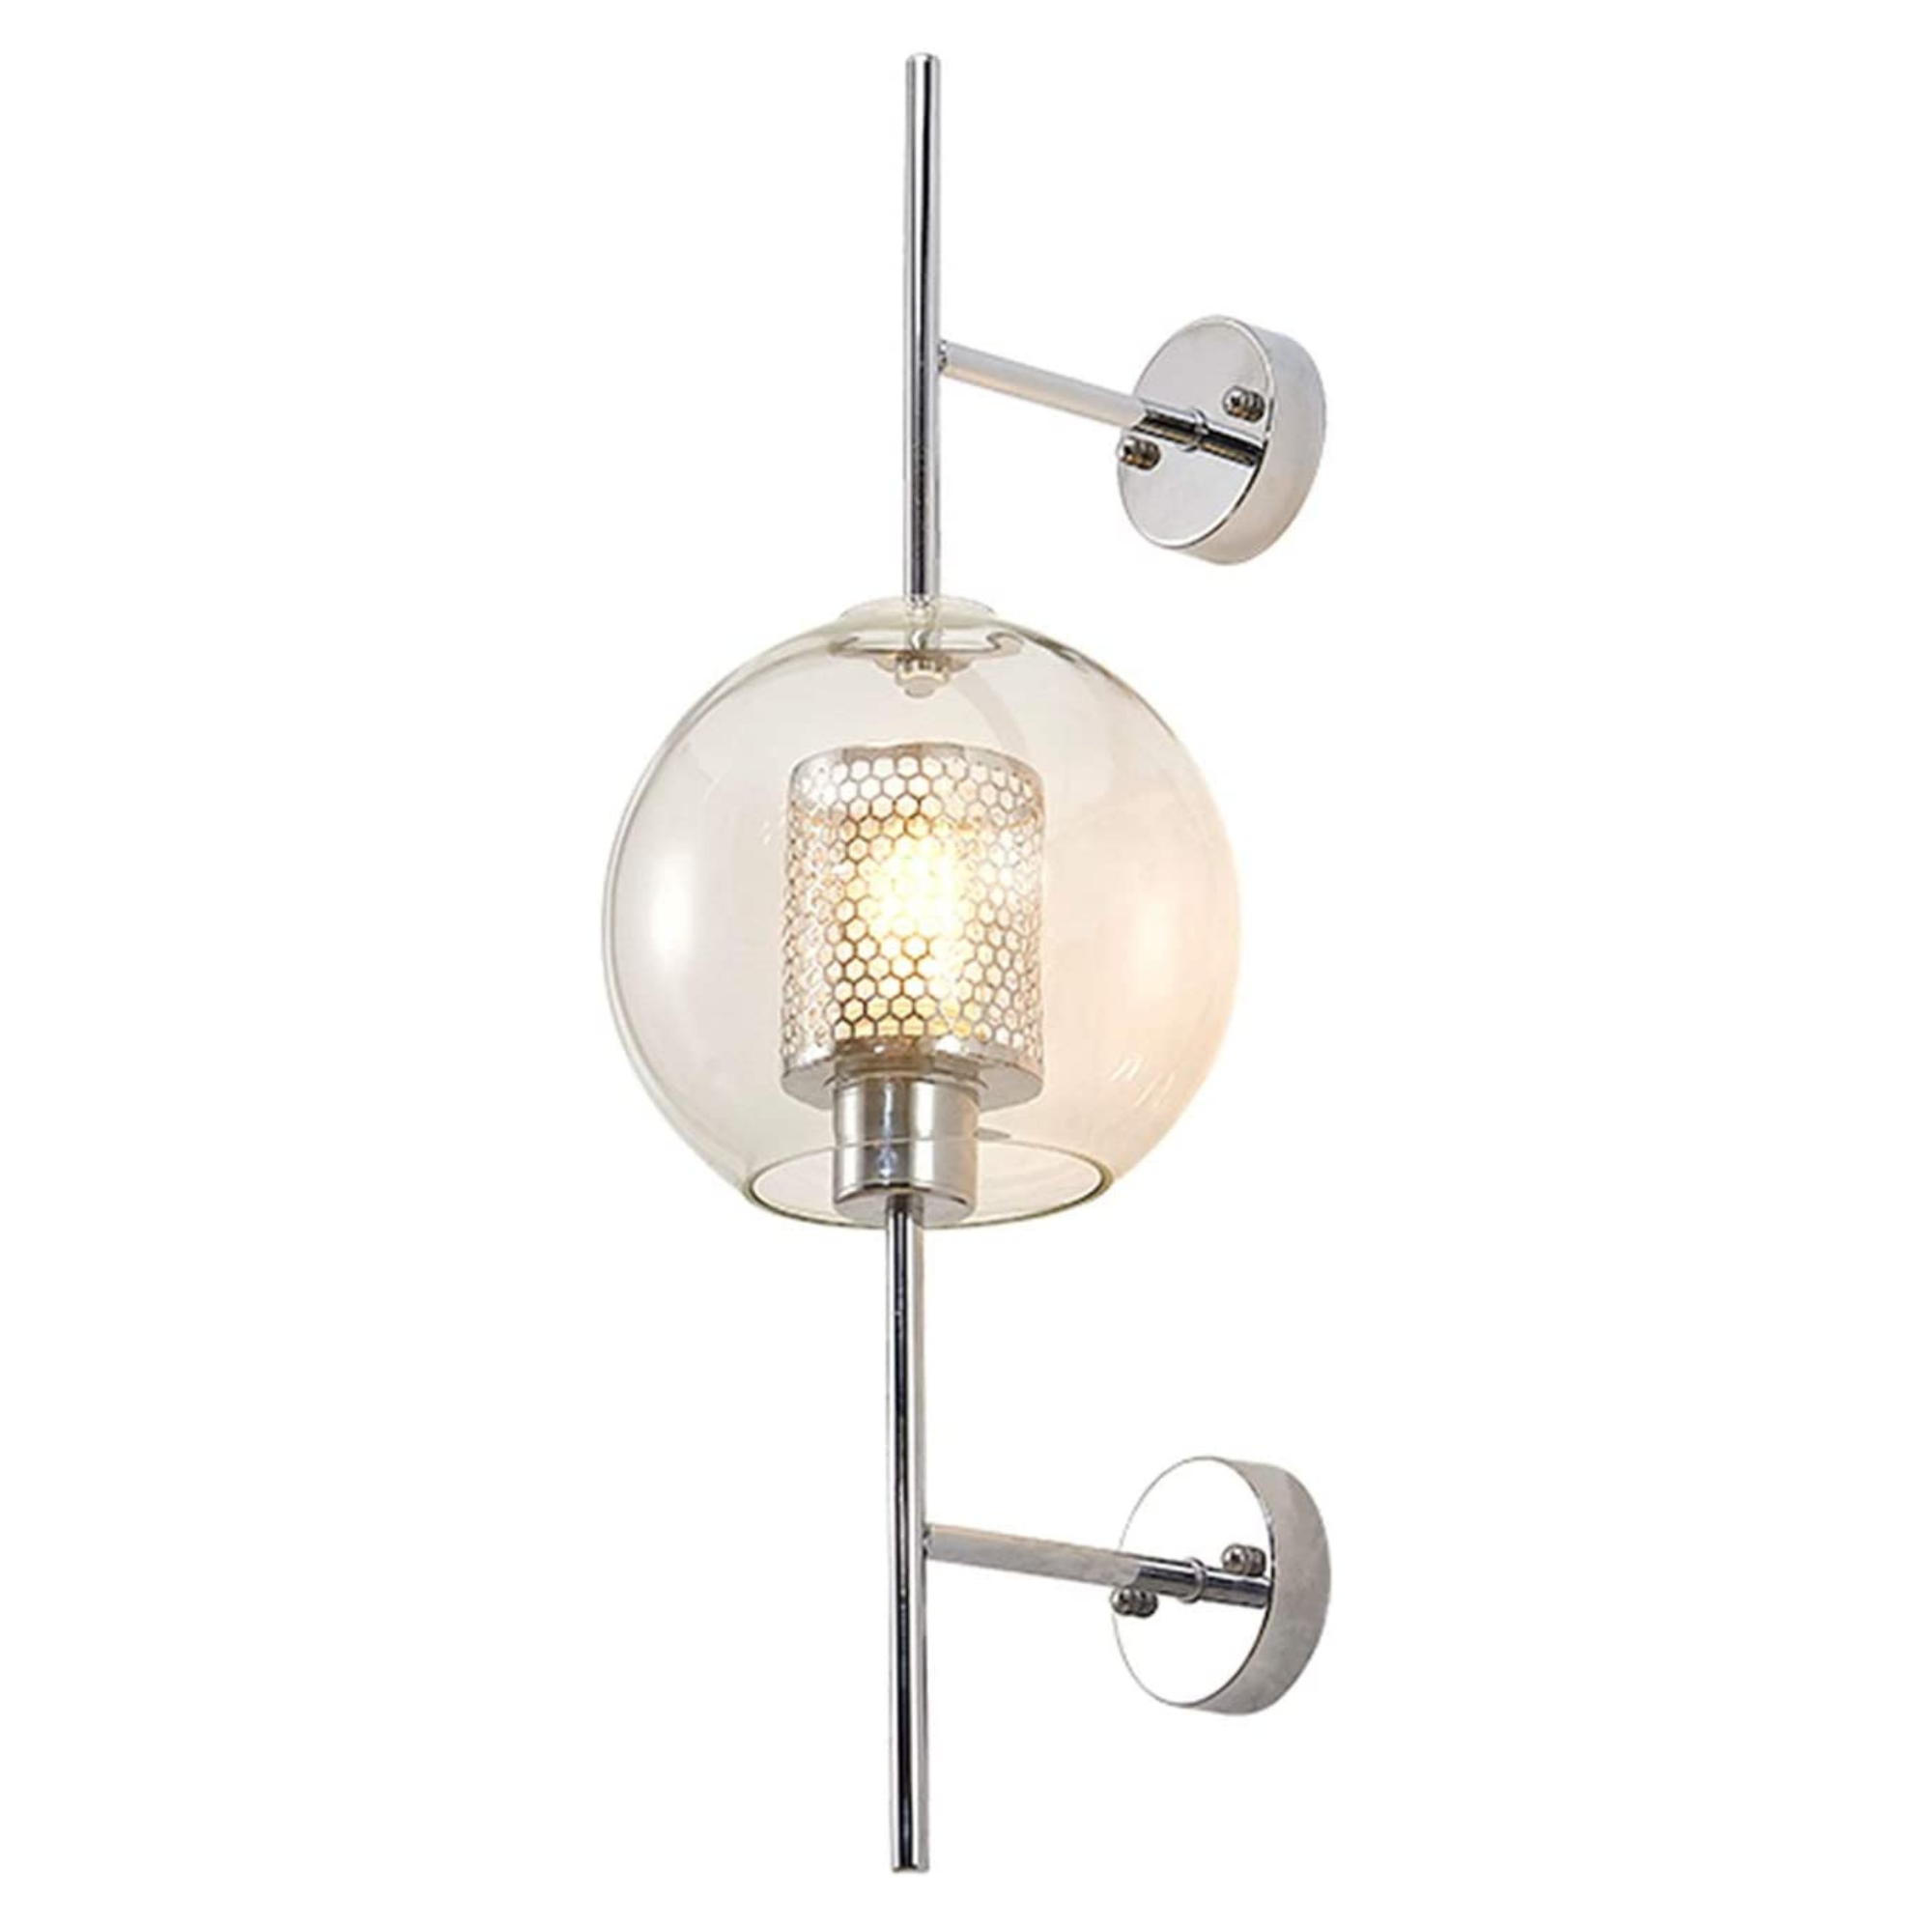 MB3158-C-200 Premium Golden Clear Glass Decorative Wall Light Perfect for Living Room, Bedroom, Hallway, Restaurant or Hotel (Single Piece)